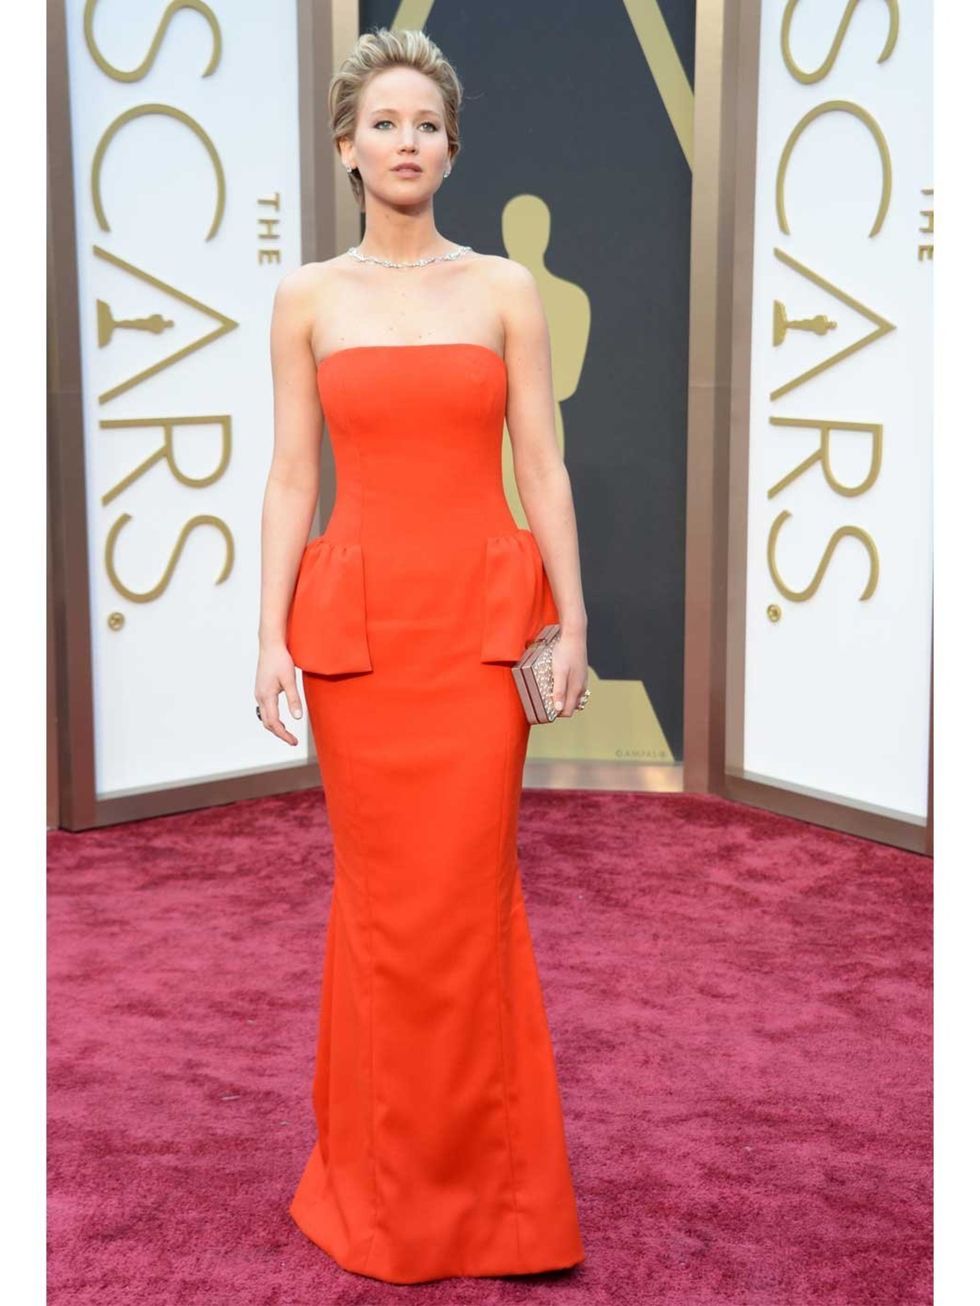 Jennifer Lawrence wears Dior to the Academy Awards 2014